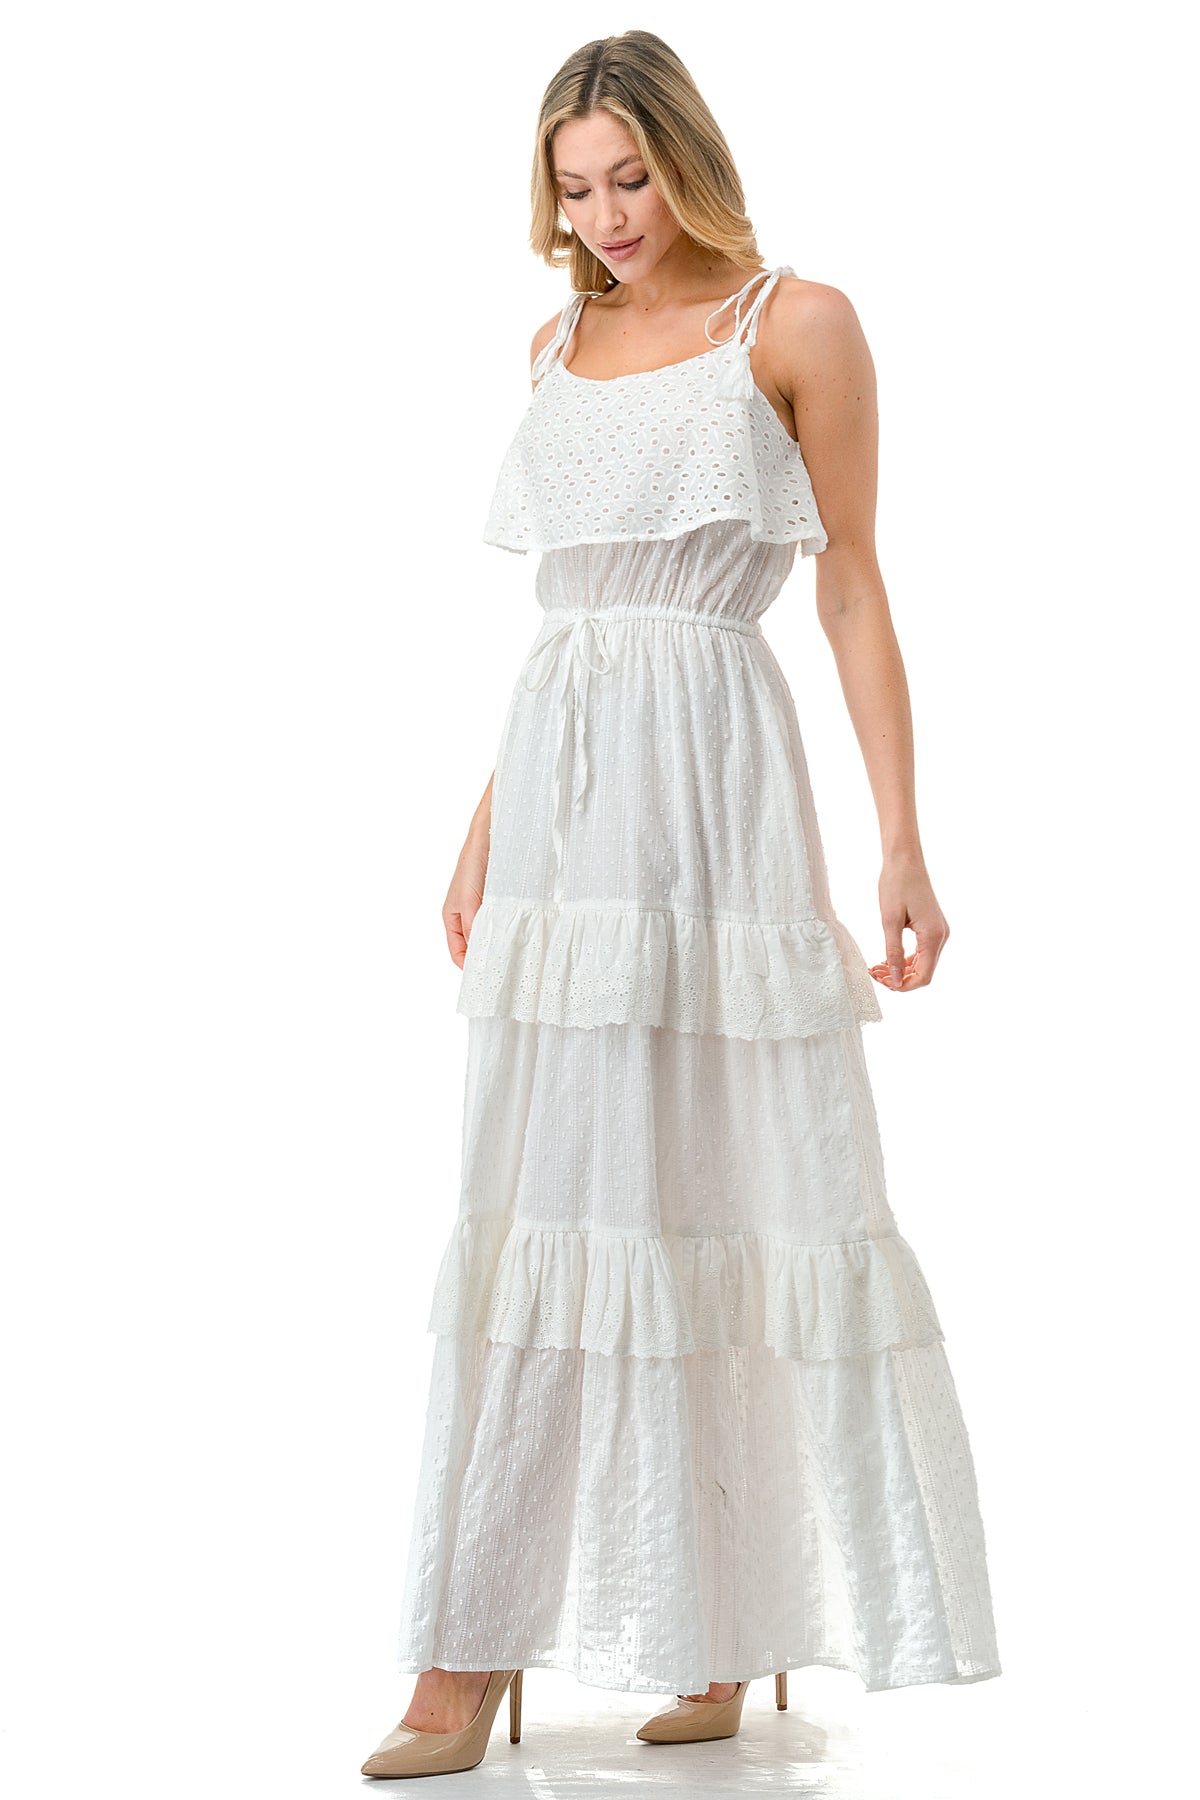 Ivory Textured Fabric Eyelet Trim Tiered Maxi Dress